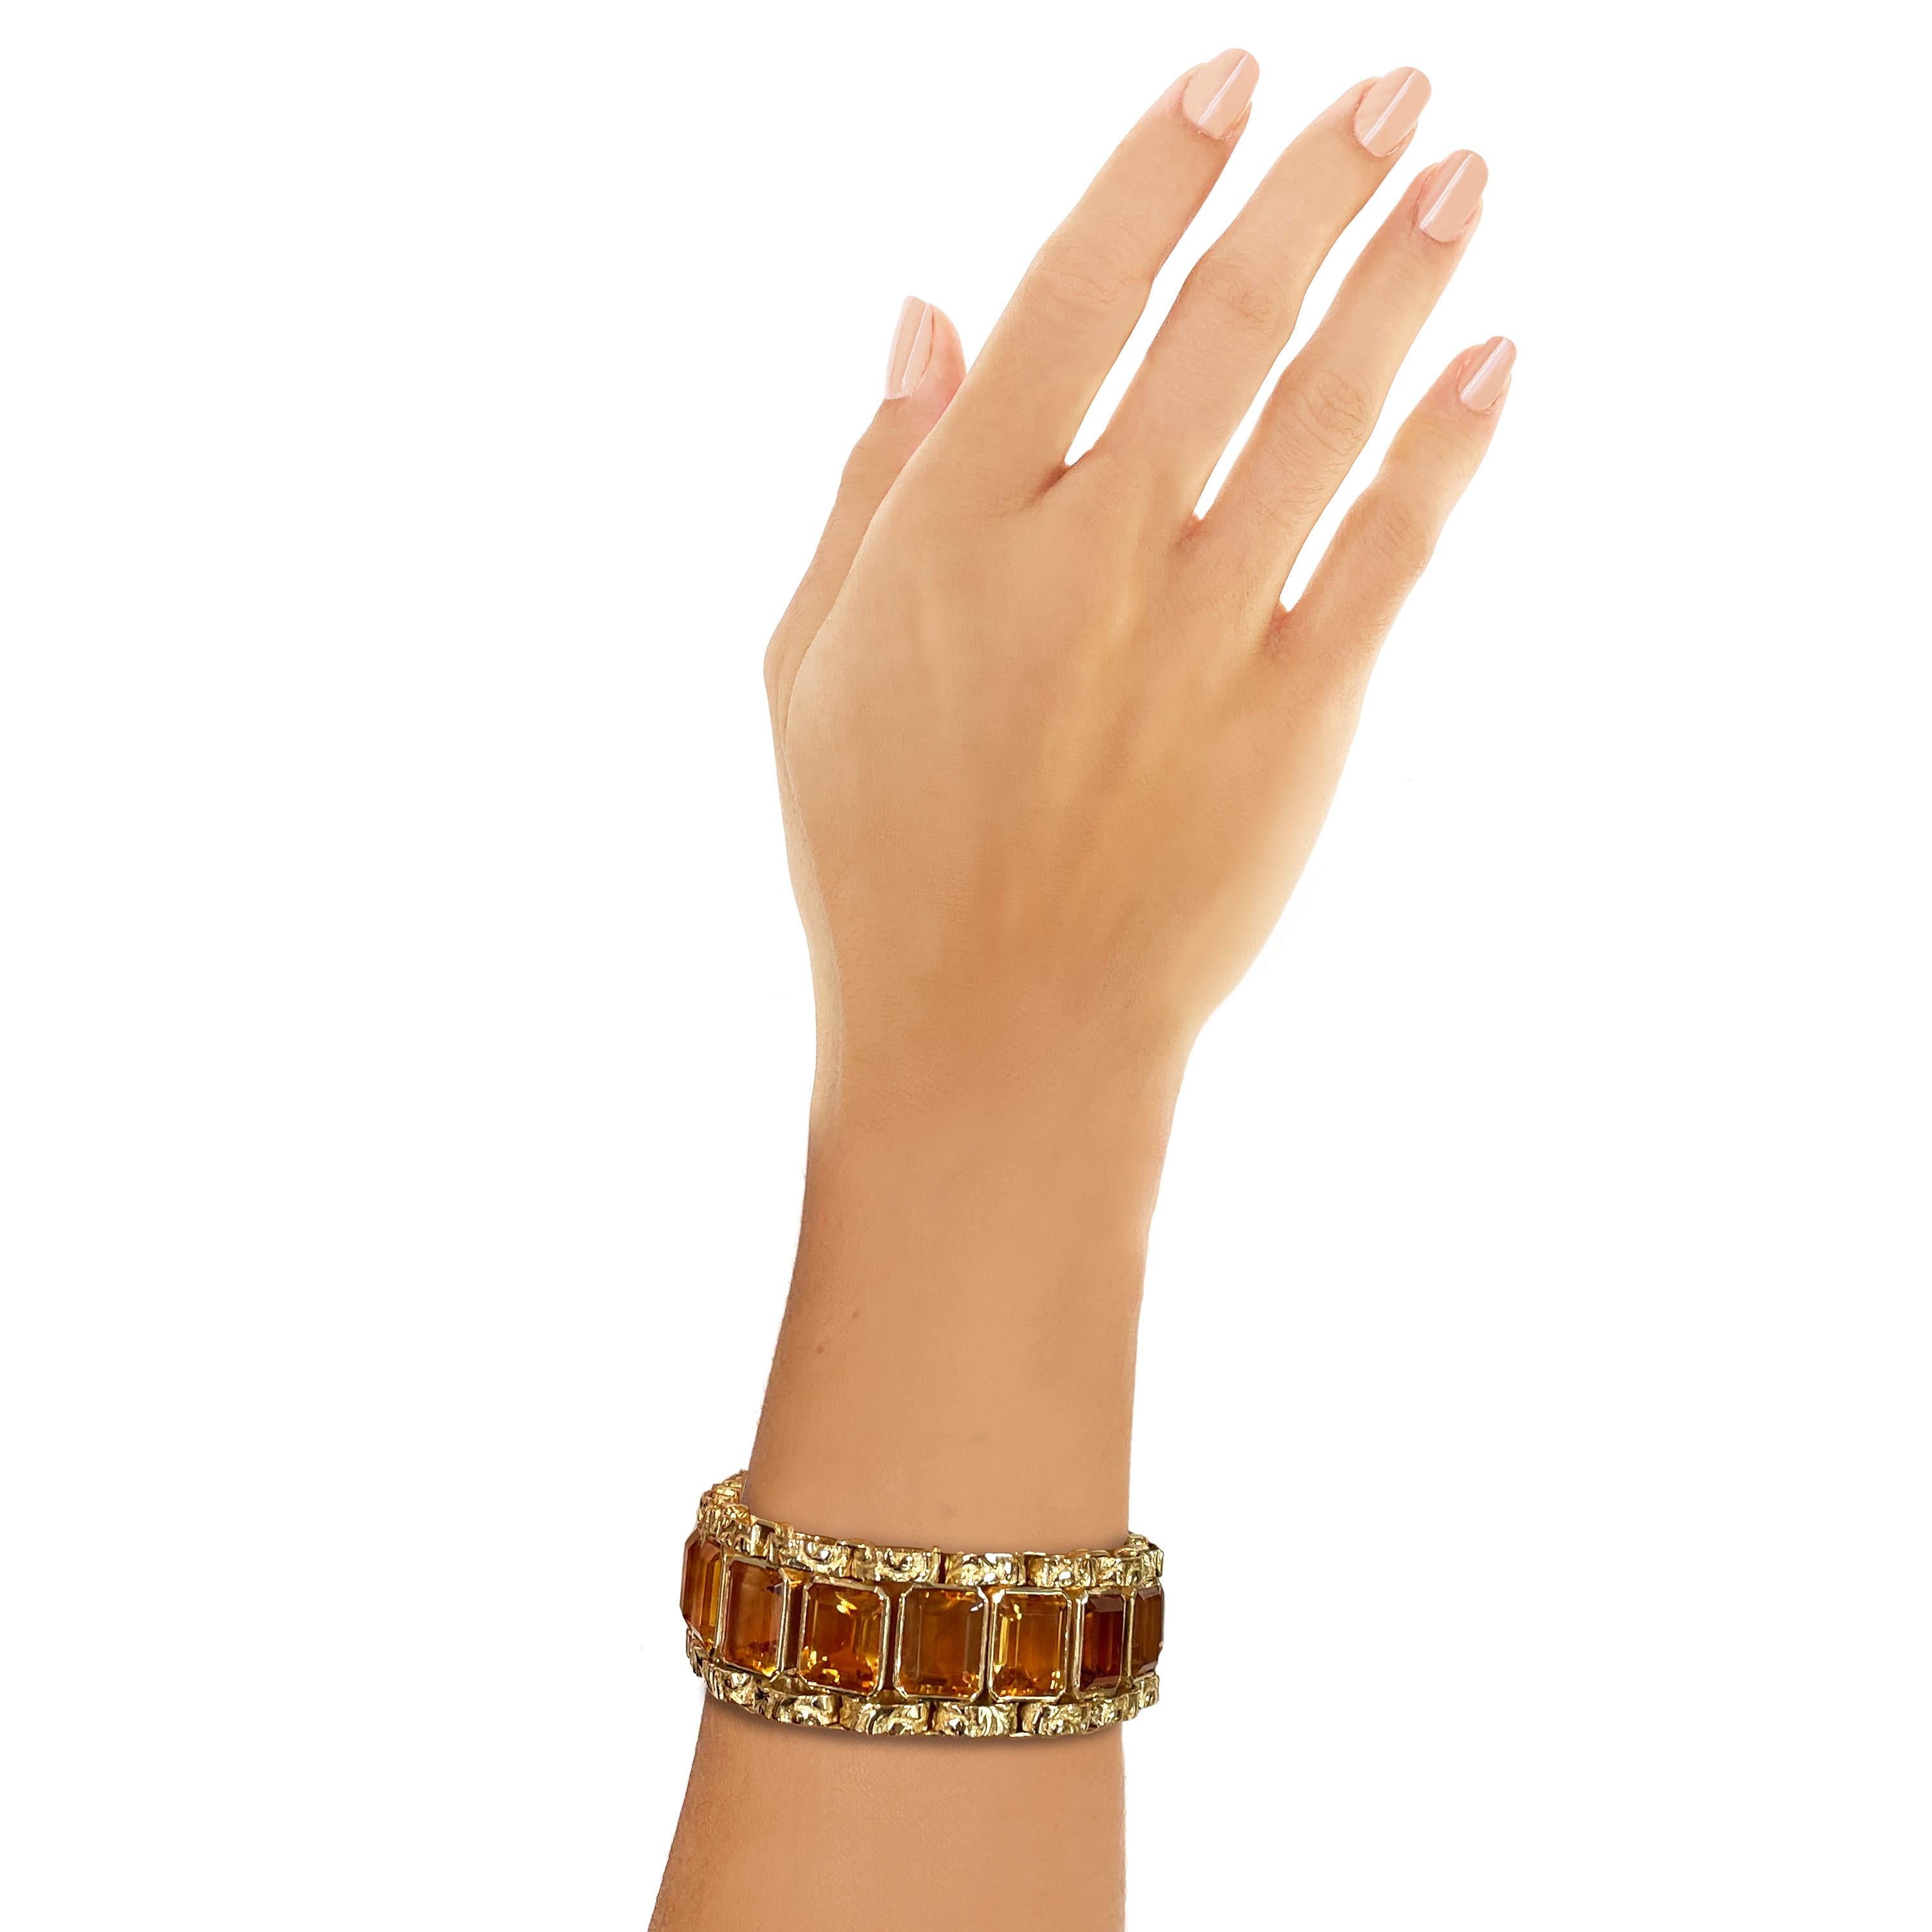 Vintage Rosior Hand Chiseled 19.2 K K Yellow Gold Bracelet set with :
- 19 Topazes à taille 